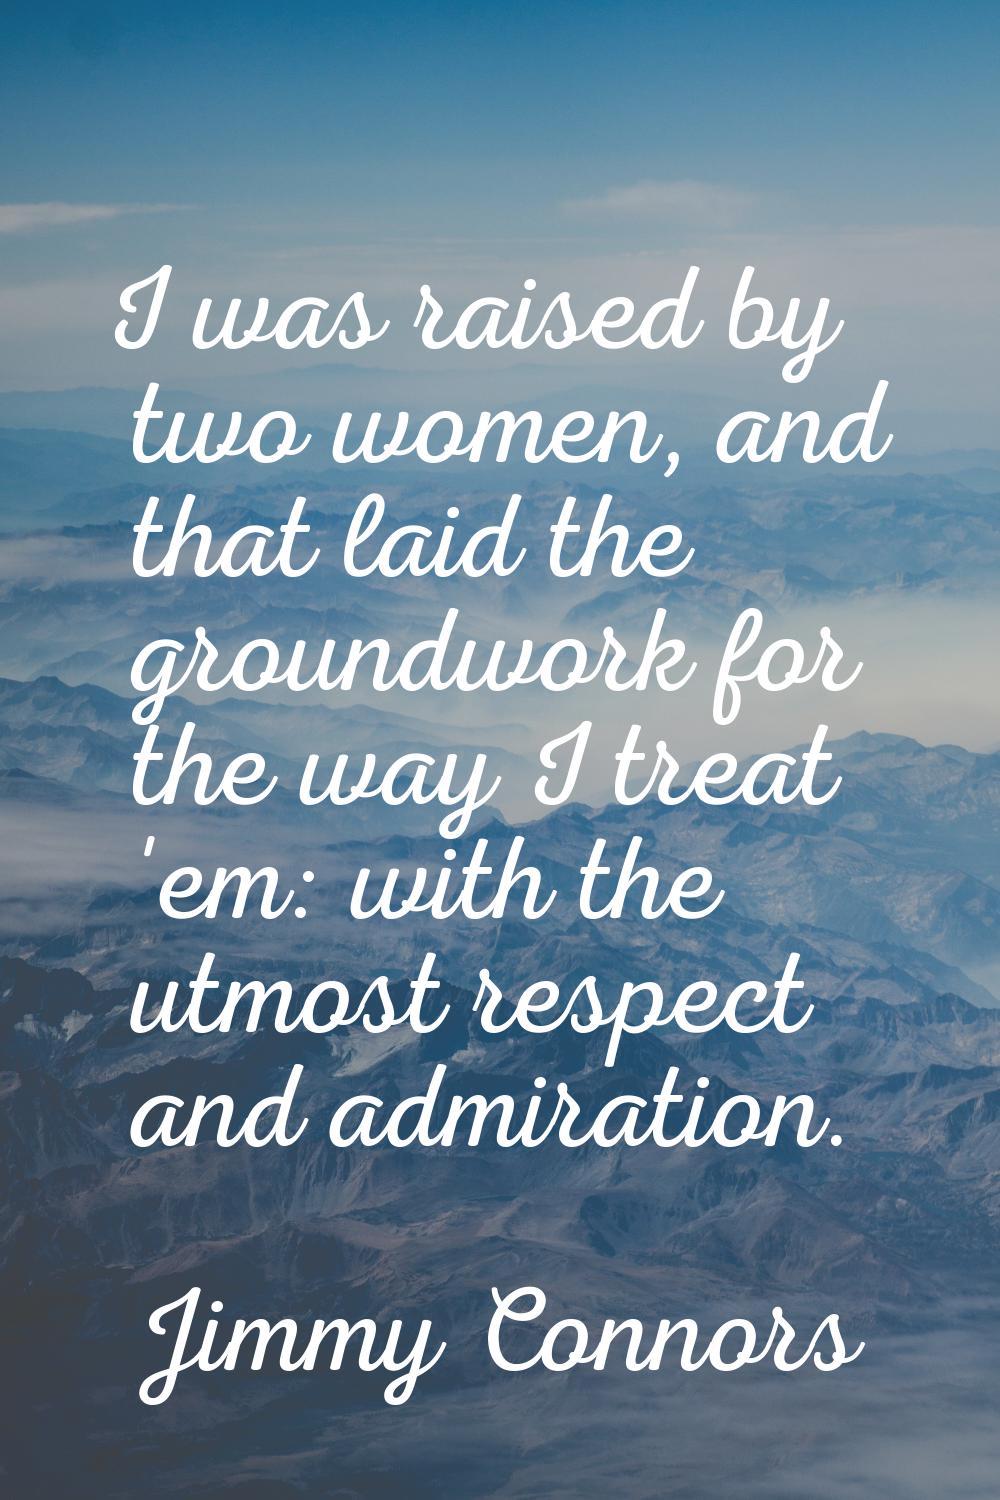 I was raised by two women, and that laid the groundwork for the way I treat 'em: with the utmost re